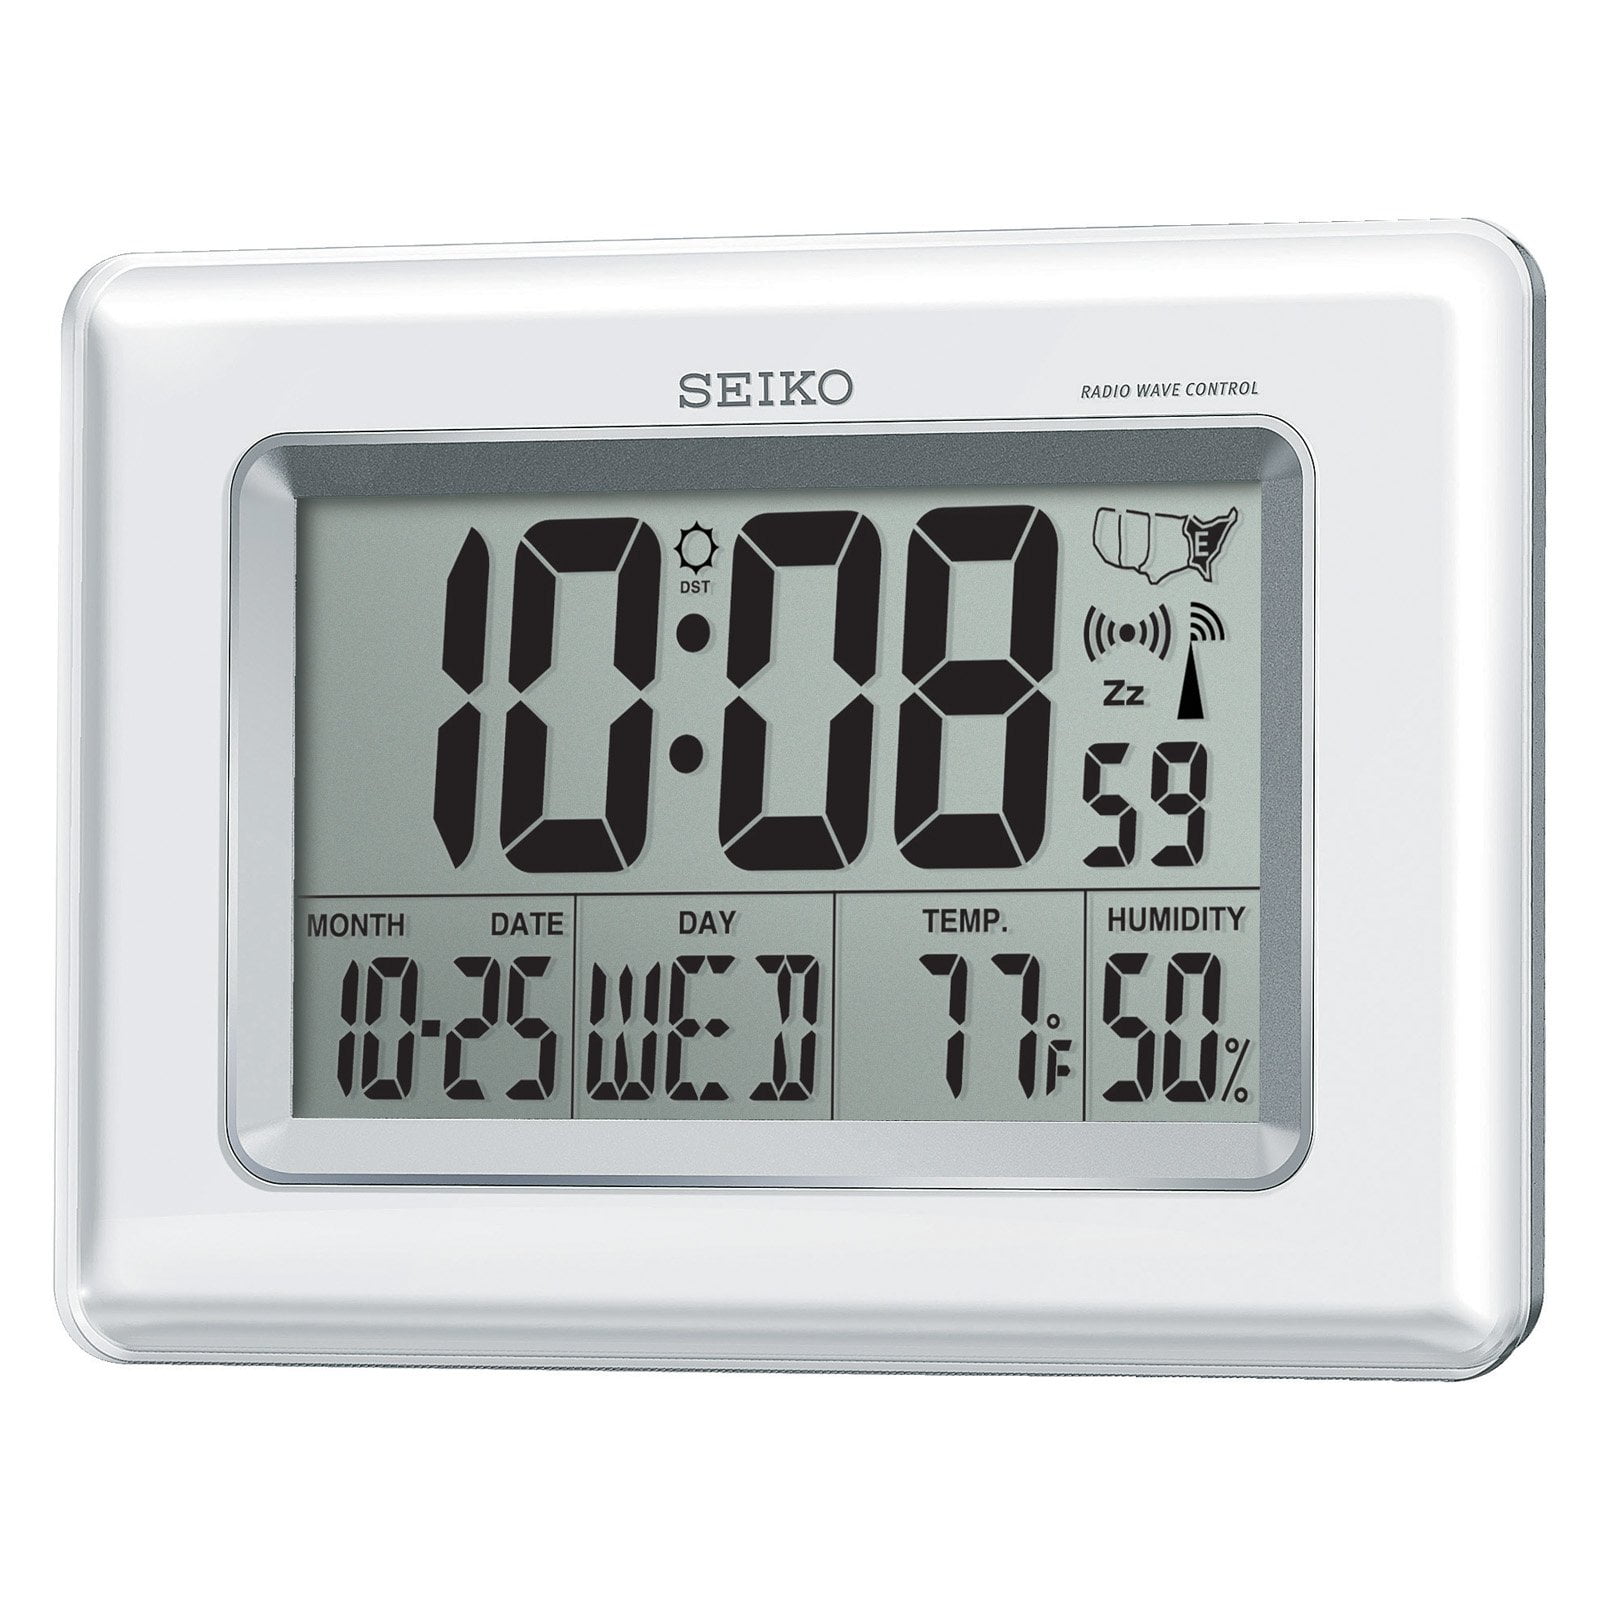 Seiko Everything Digital R WAVE Clock w/ Thermometer, Hygrometer, Calendar,  Wall or Stand 